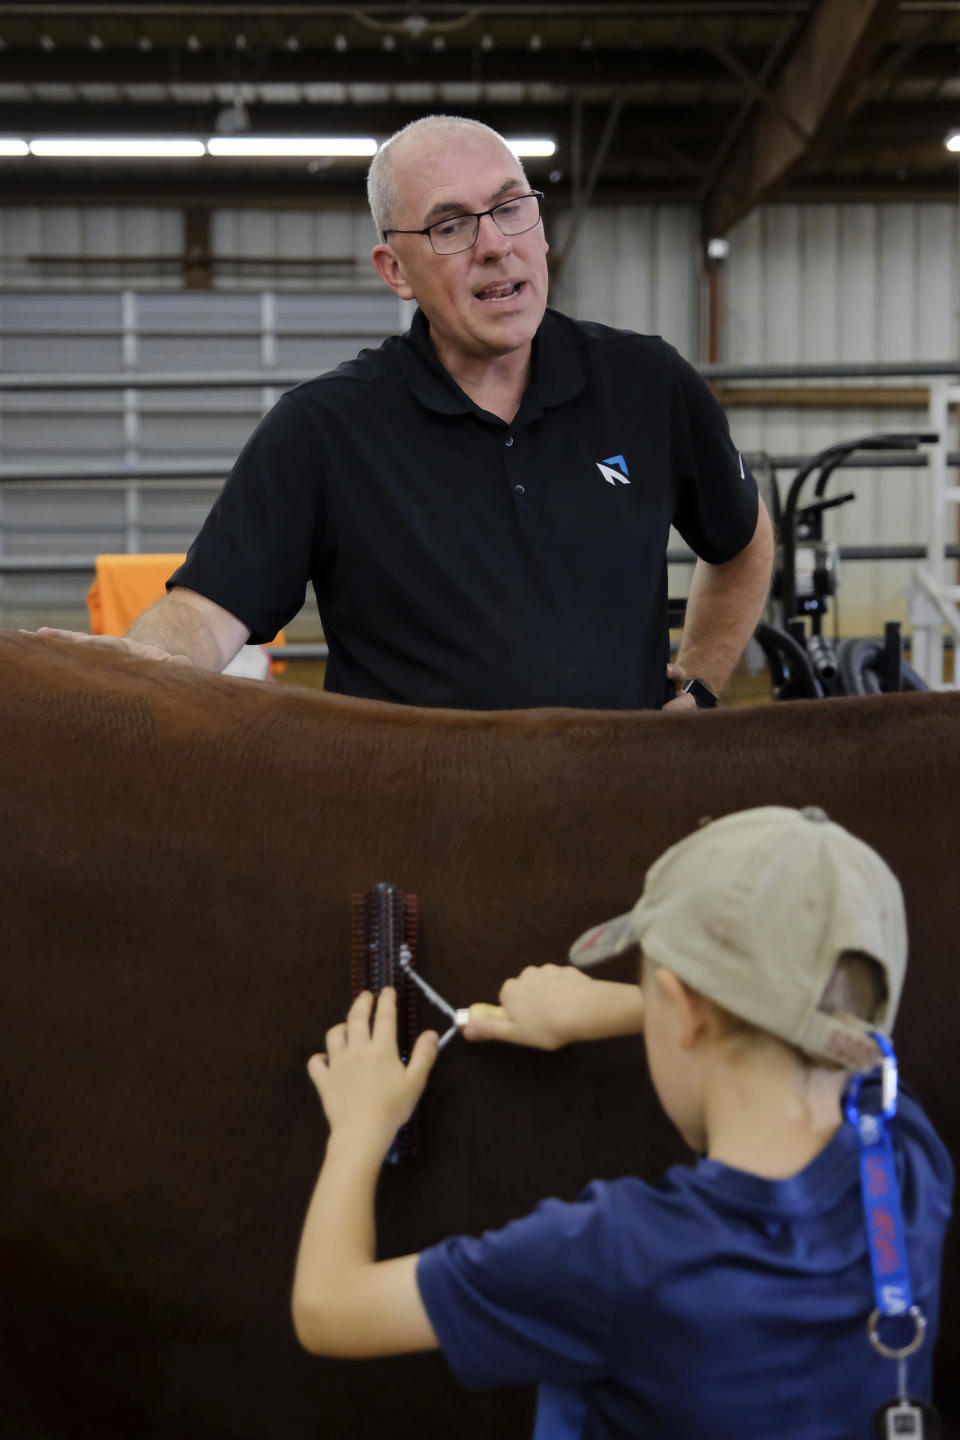 Bart Barber gives Caleb Coblentz, 5, tips on brushing heifers at a 4-H sponsored event in McKinney, Texas, on Saturday, Sept. 24, 2022. (AP Photo/Audrey Jackson)